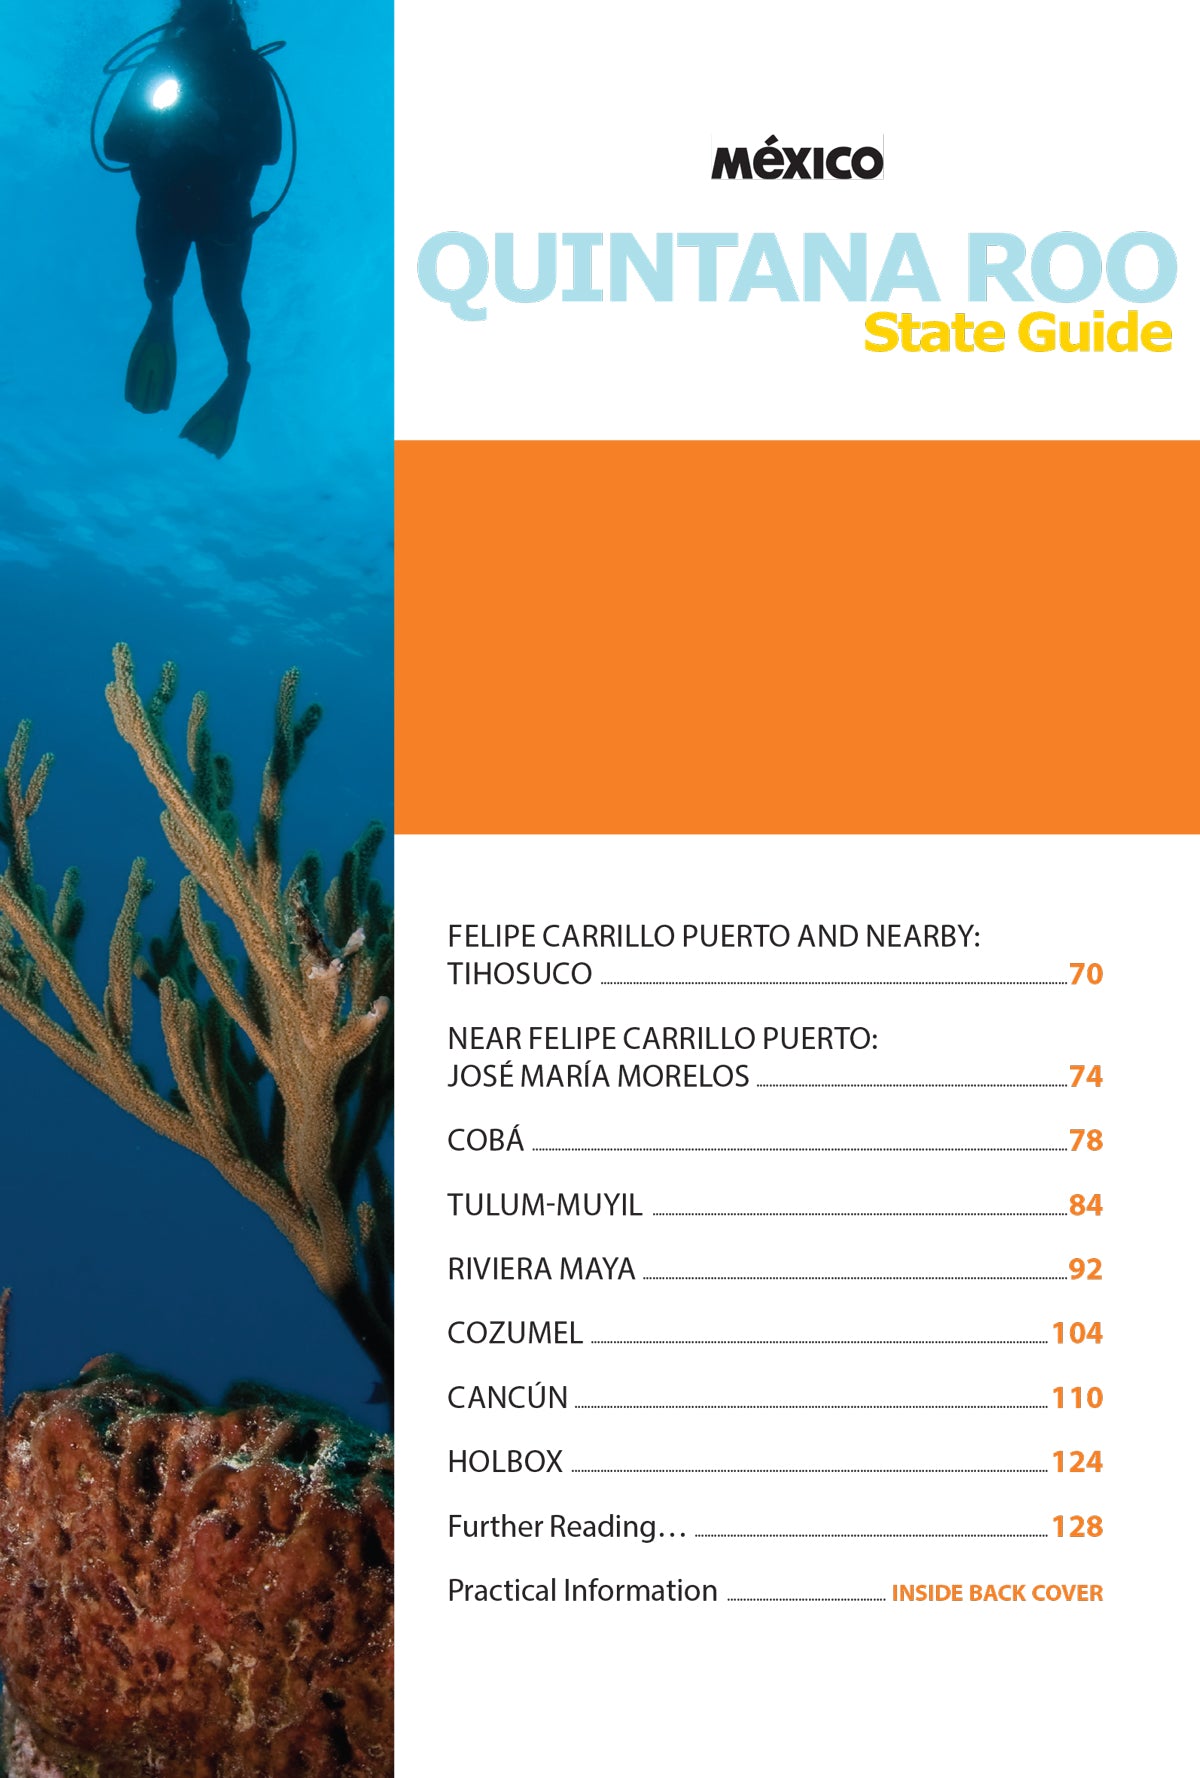 Quintana Roo - State Guide - English version